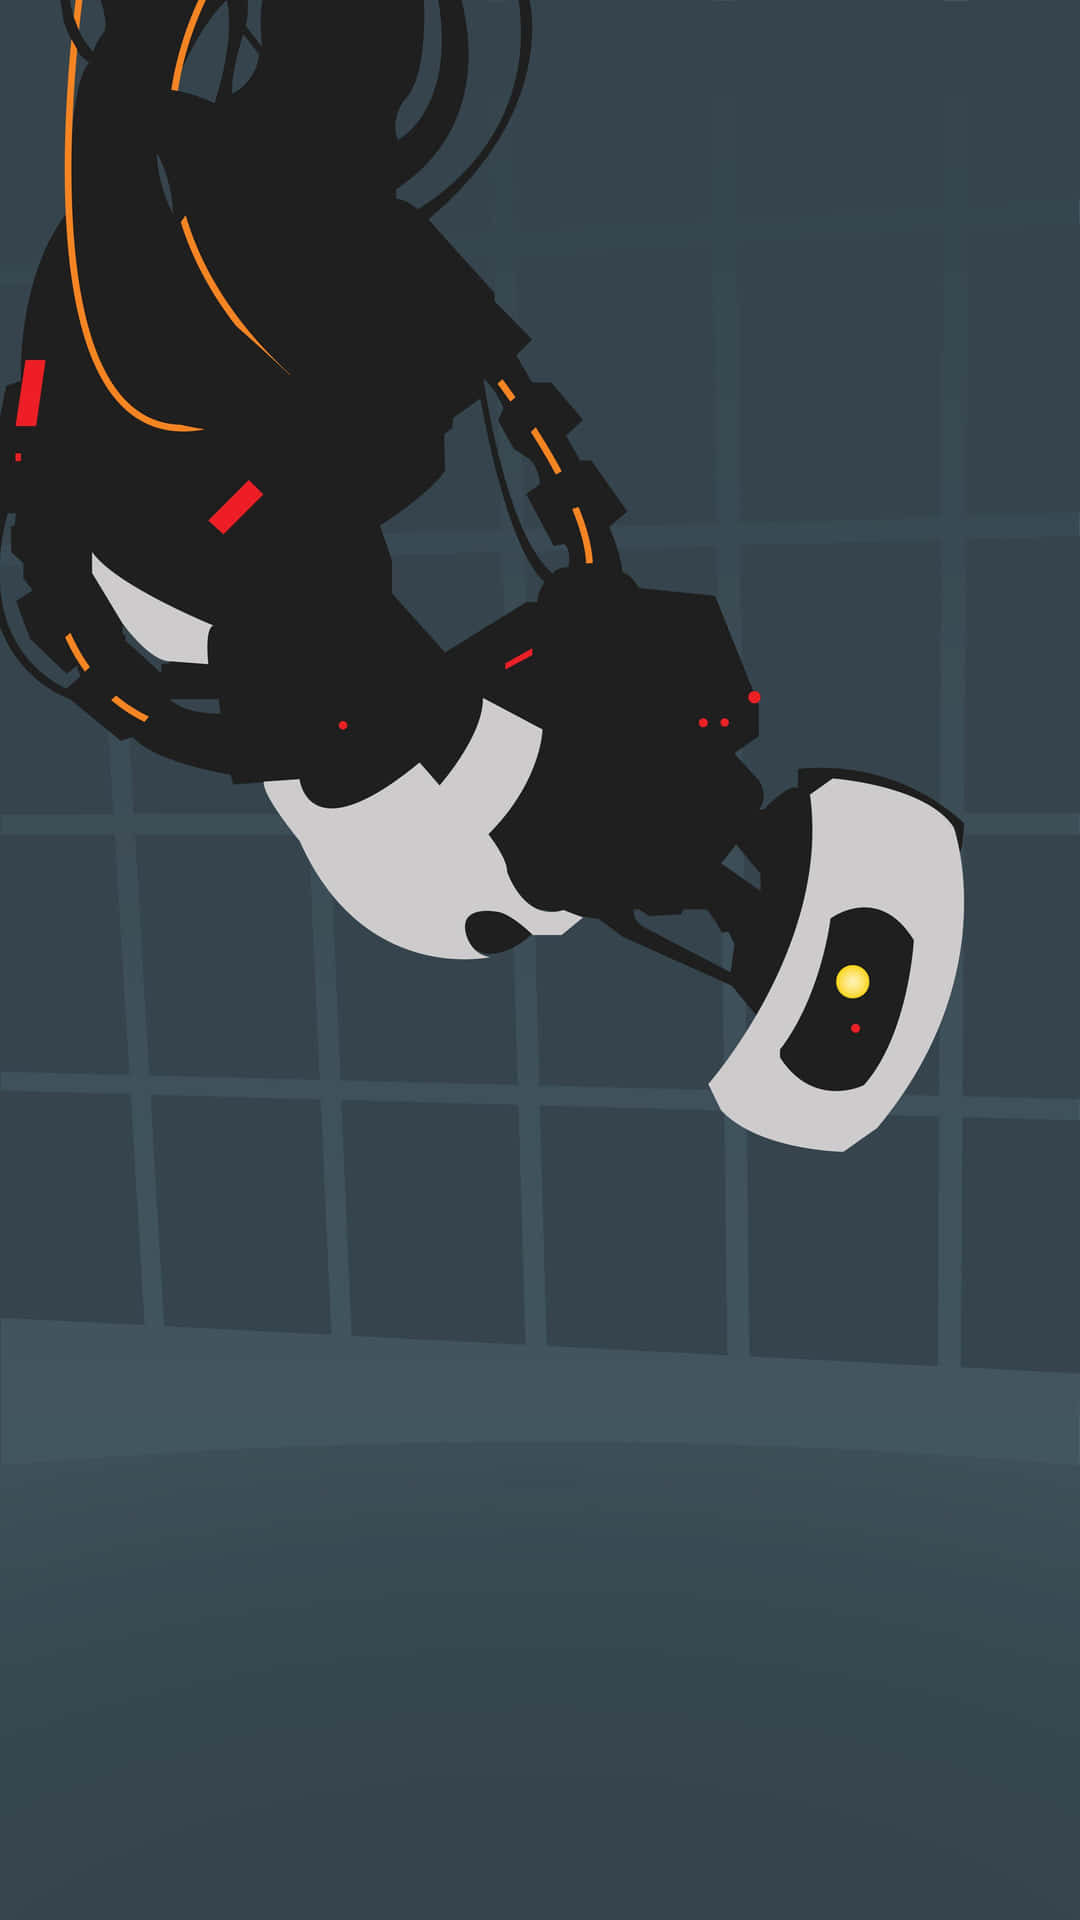 "captivating Perspective Of Aperture Science Laboratory In Portal 2"